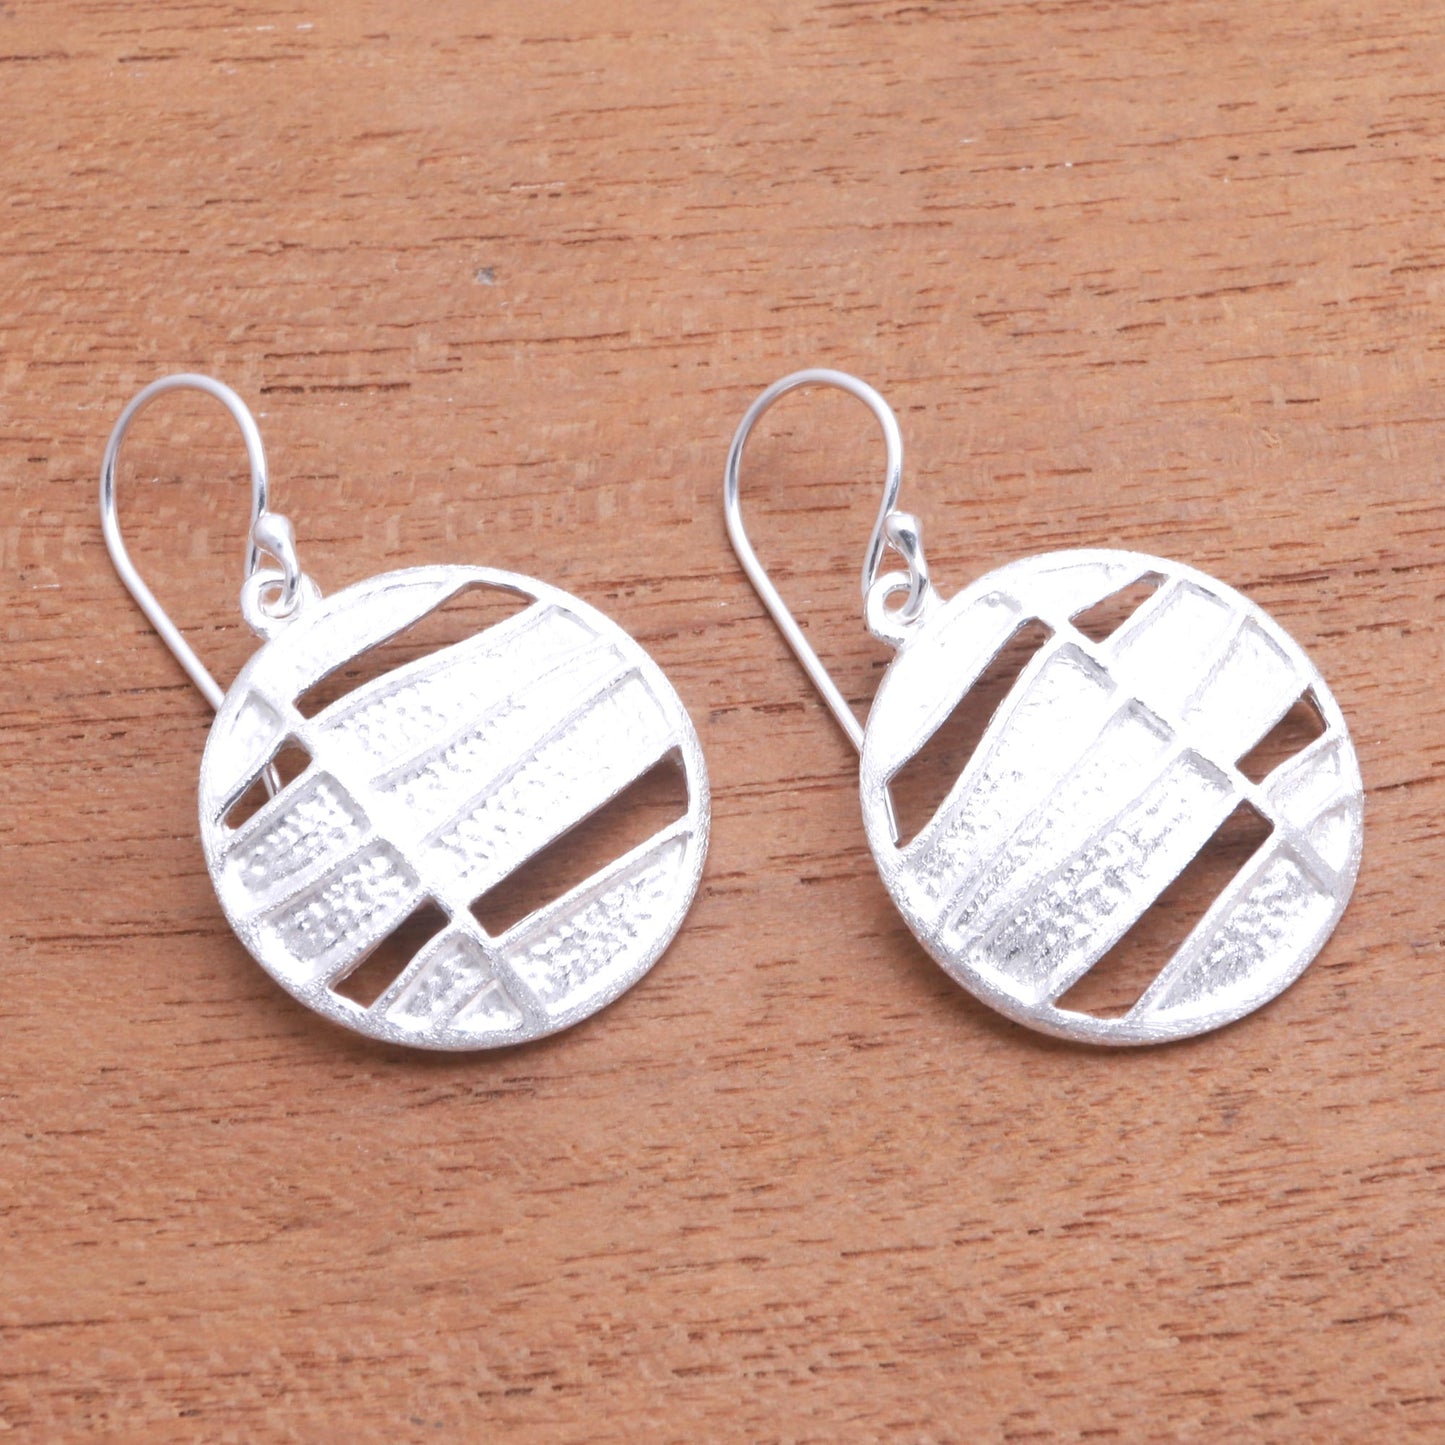 Intriguing Circles Modern Circular Sterling Silver Dangle Earrings from Bali